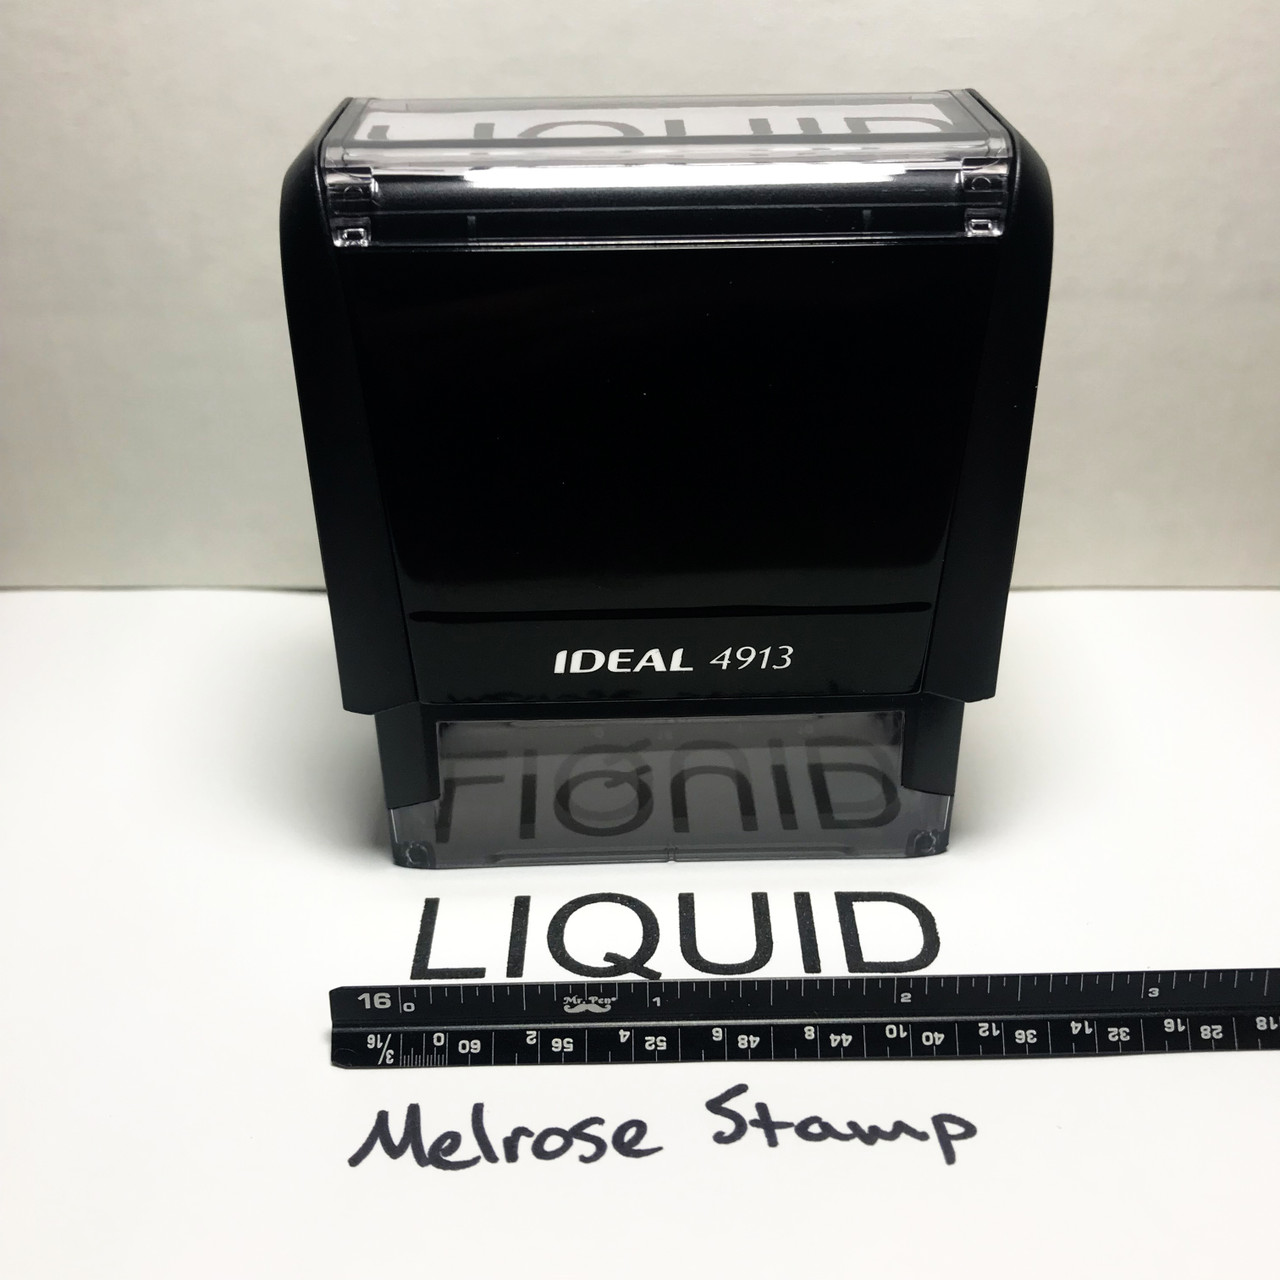 Liquid Rubber Stamp For Mail Use Self Inking Melrose Stamp Company 0650